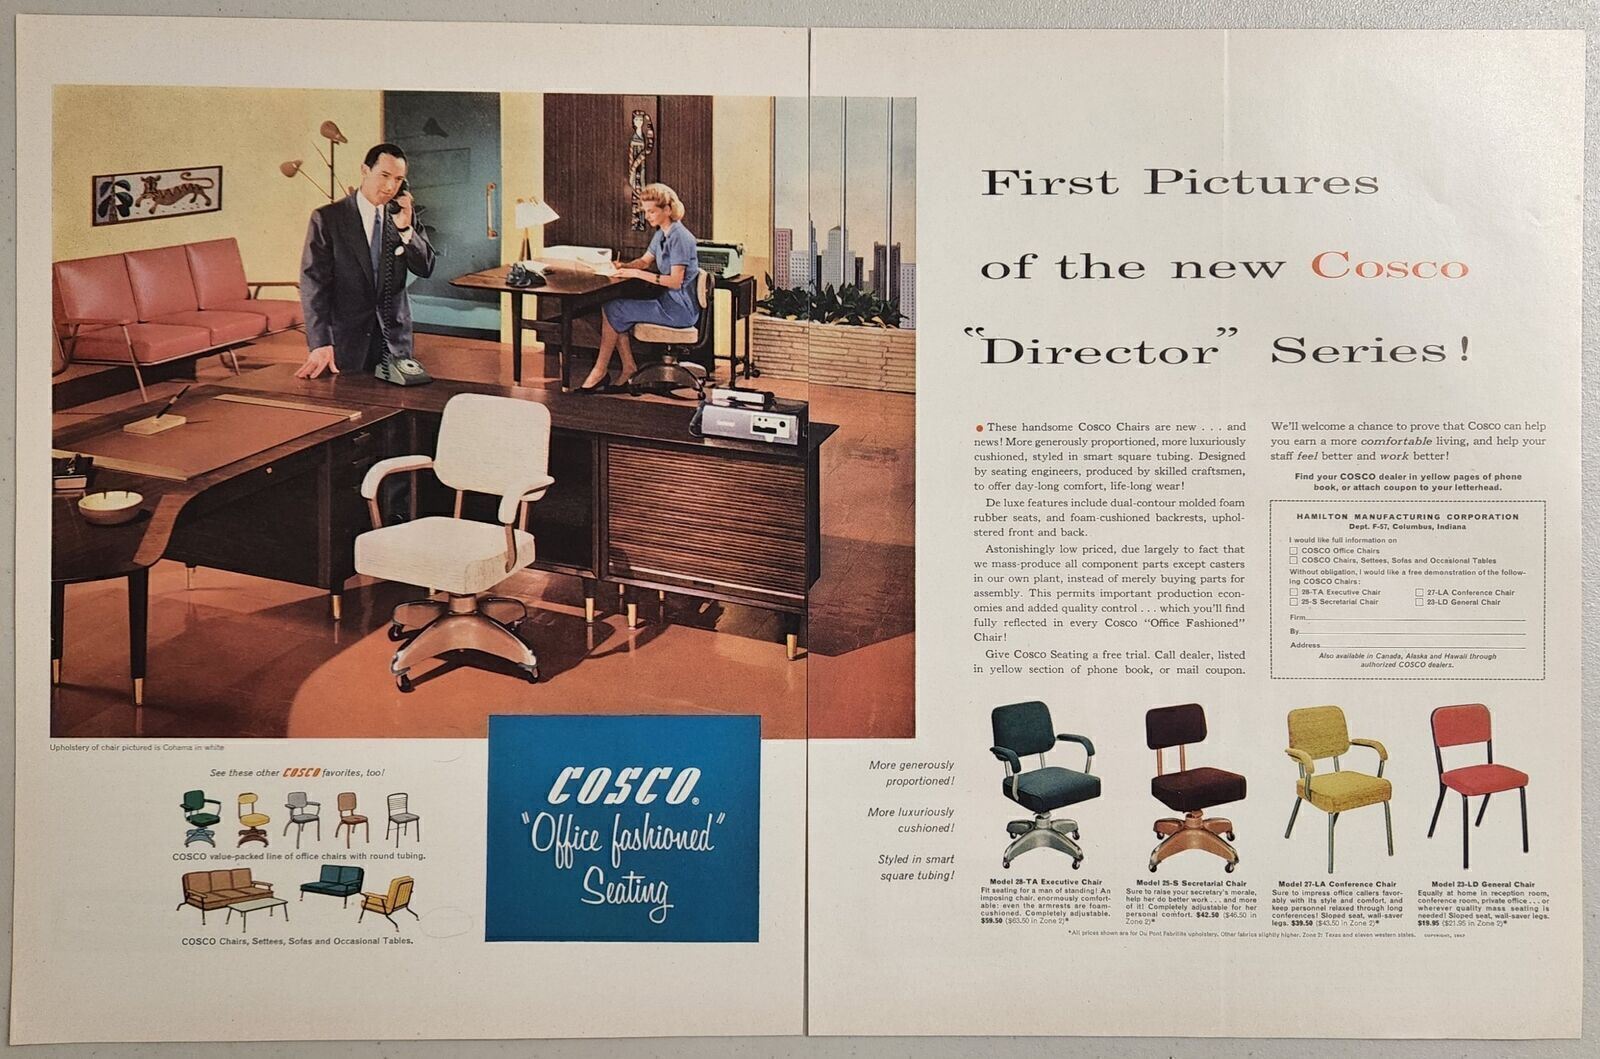 1957 Print Ad Cosco Office Fashioned Seating Chairs Hamilton Mfg Columbus,IN